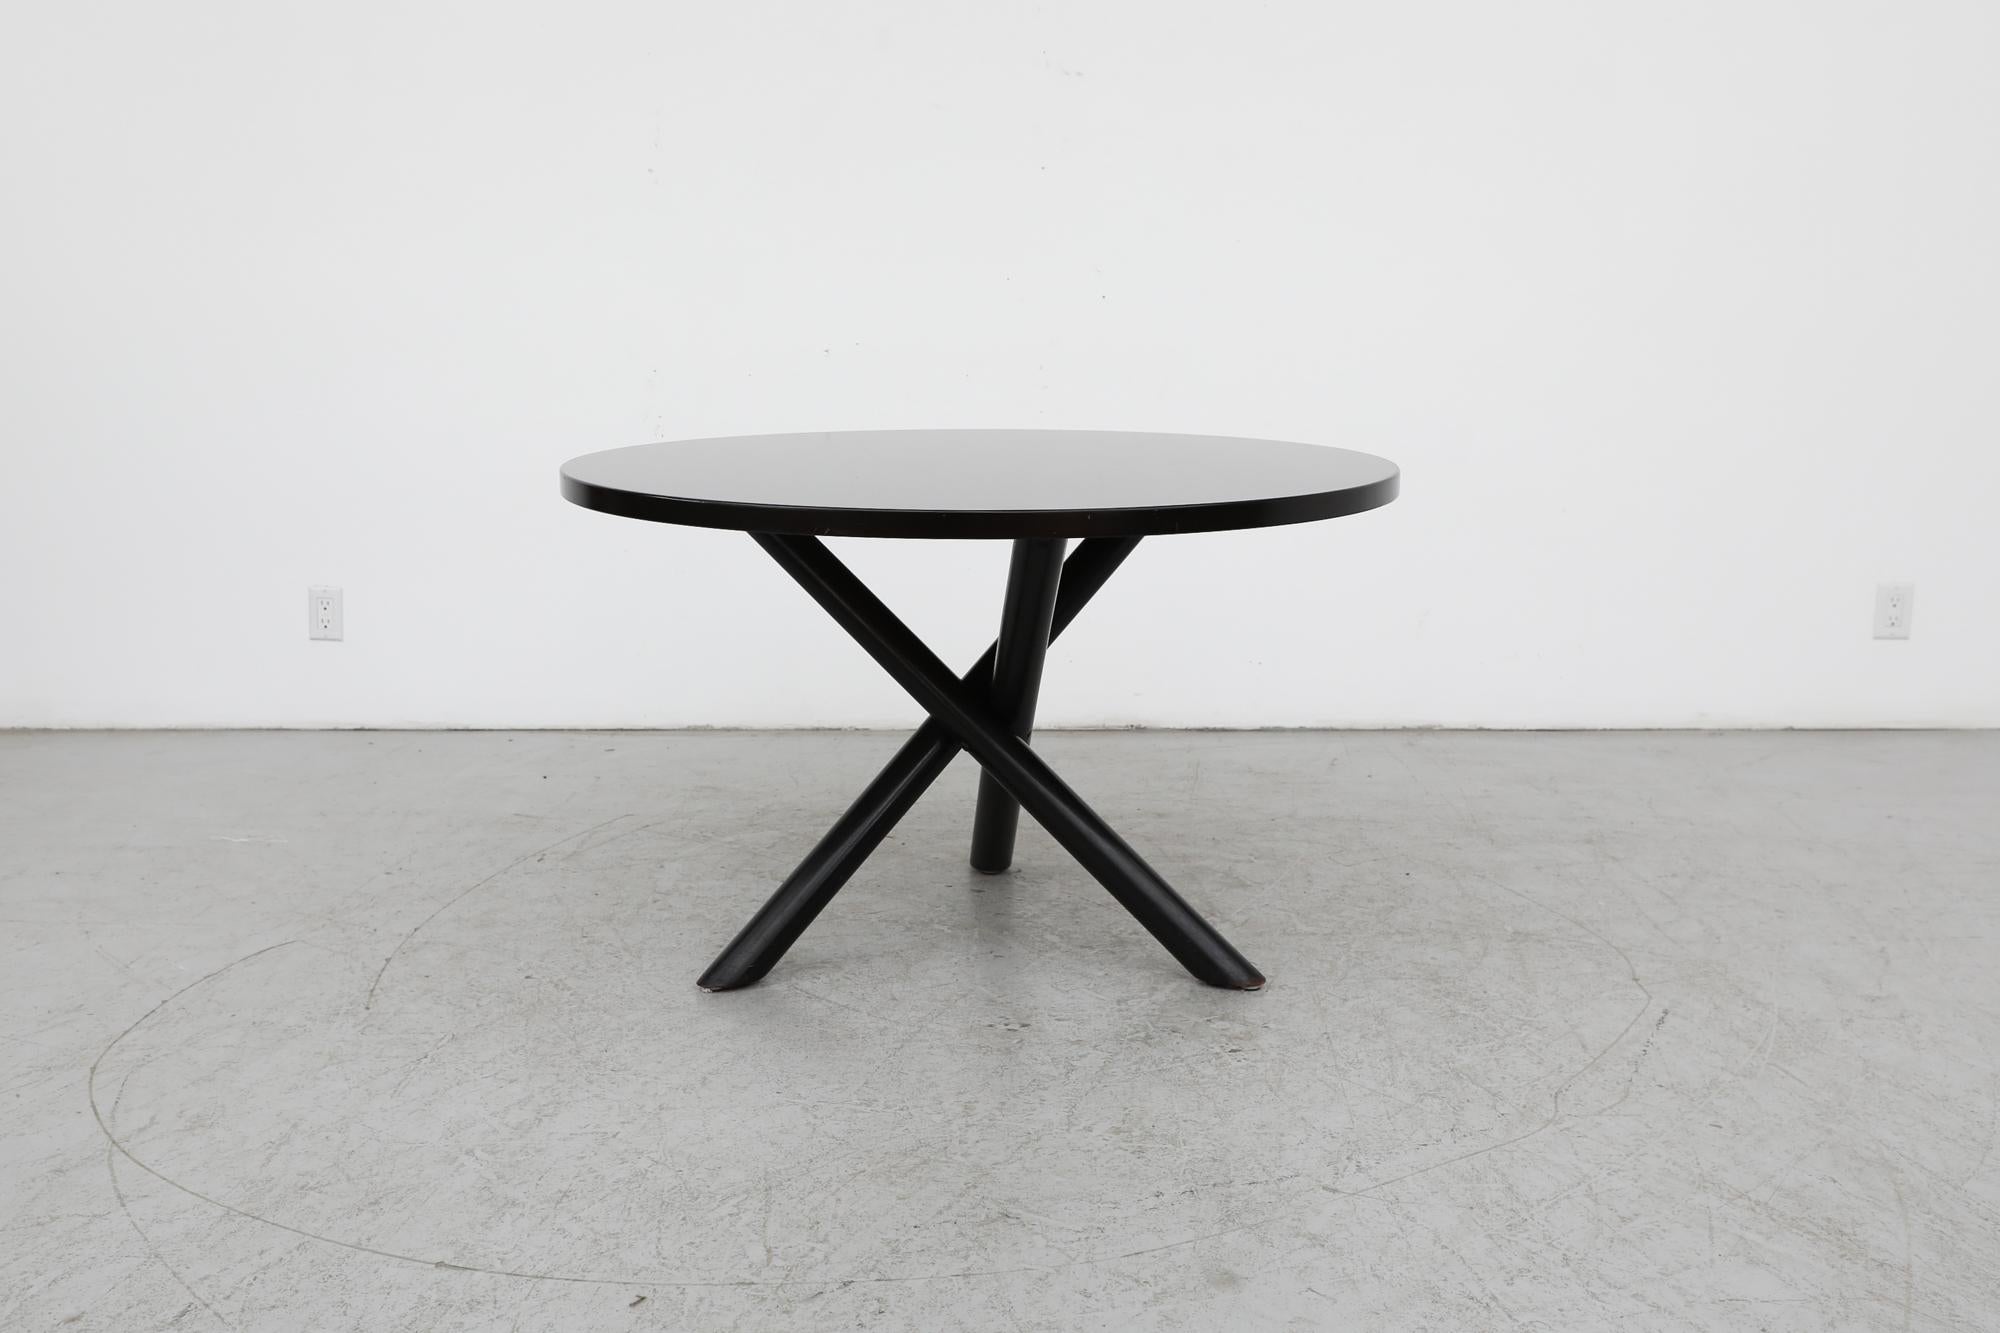 Beautiful Mid-Century black lacquered dining or center table designed by Dutchman Gerard Geytenbeek and made by Zwijnenburg in the 1960s.  The 